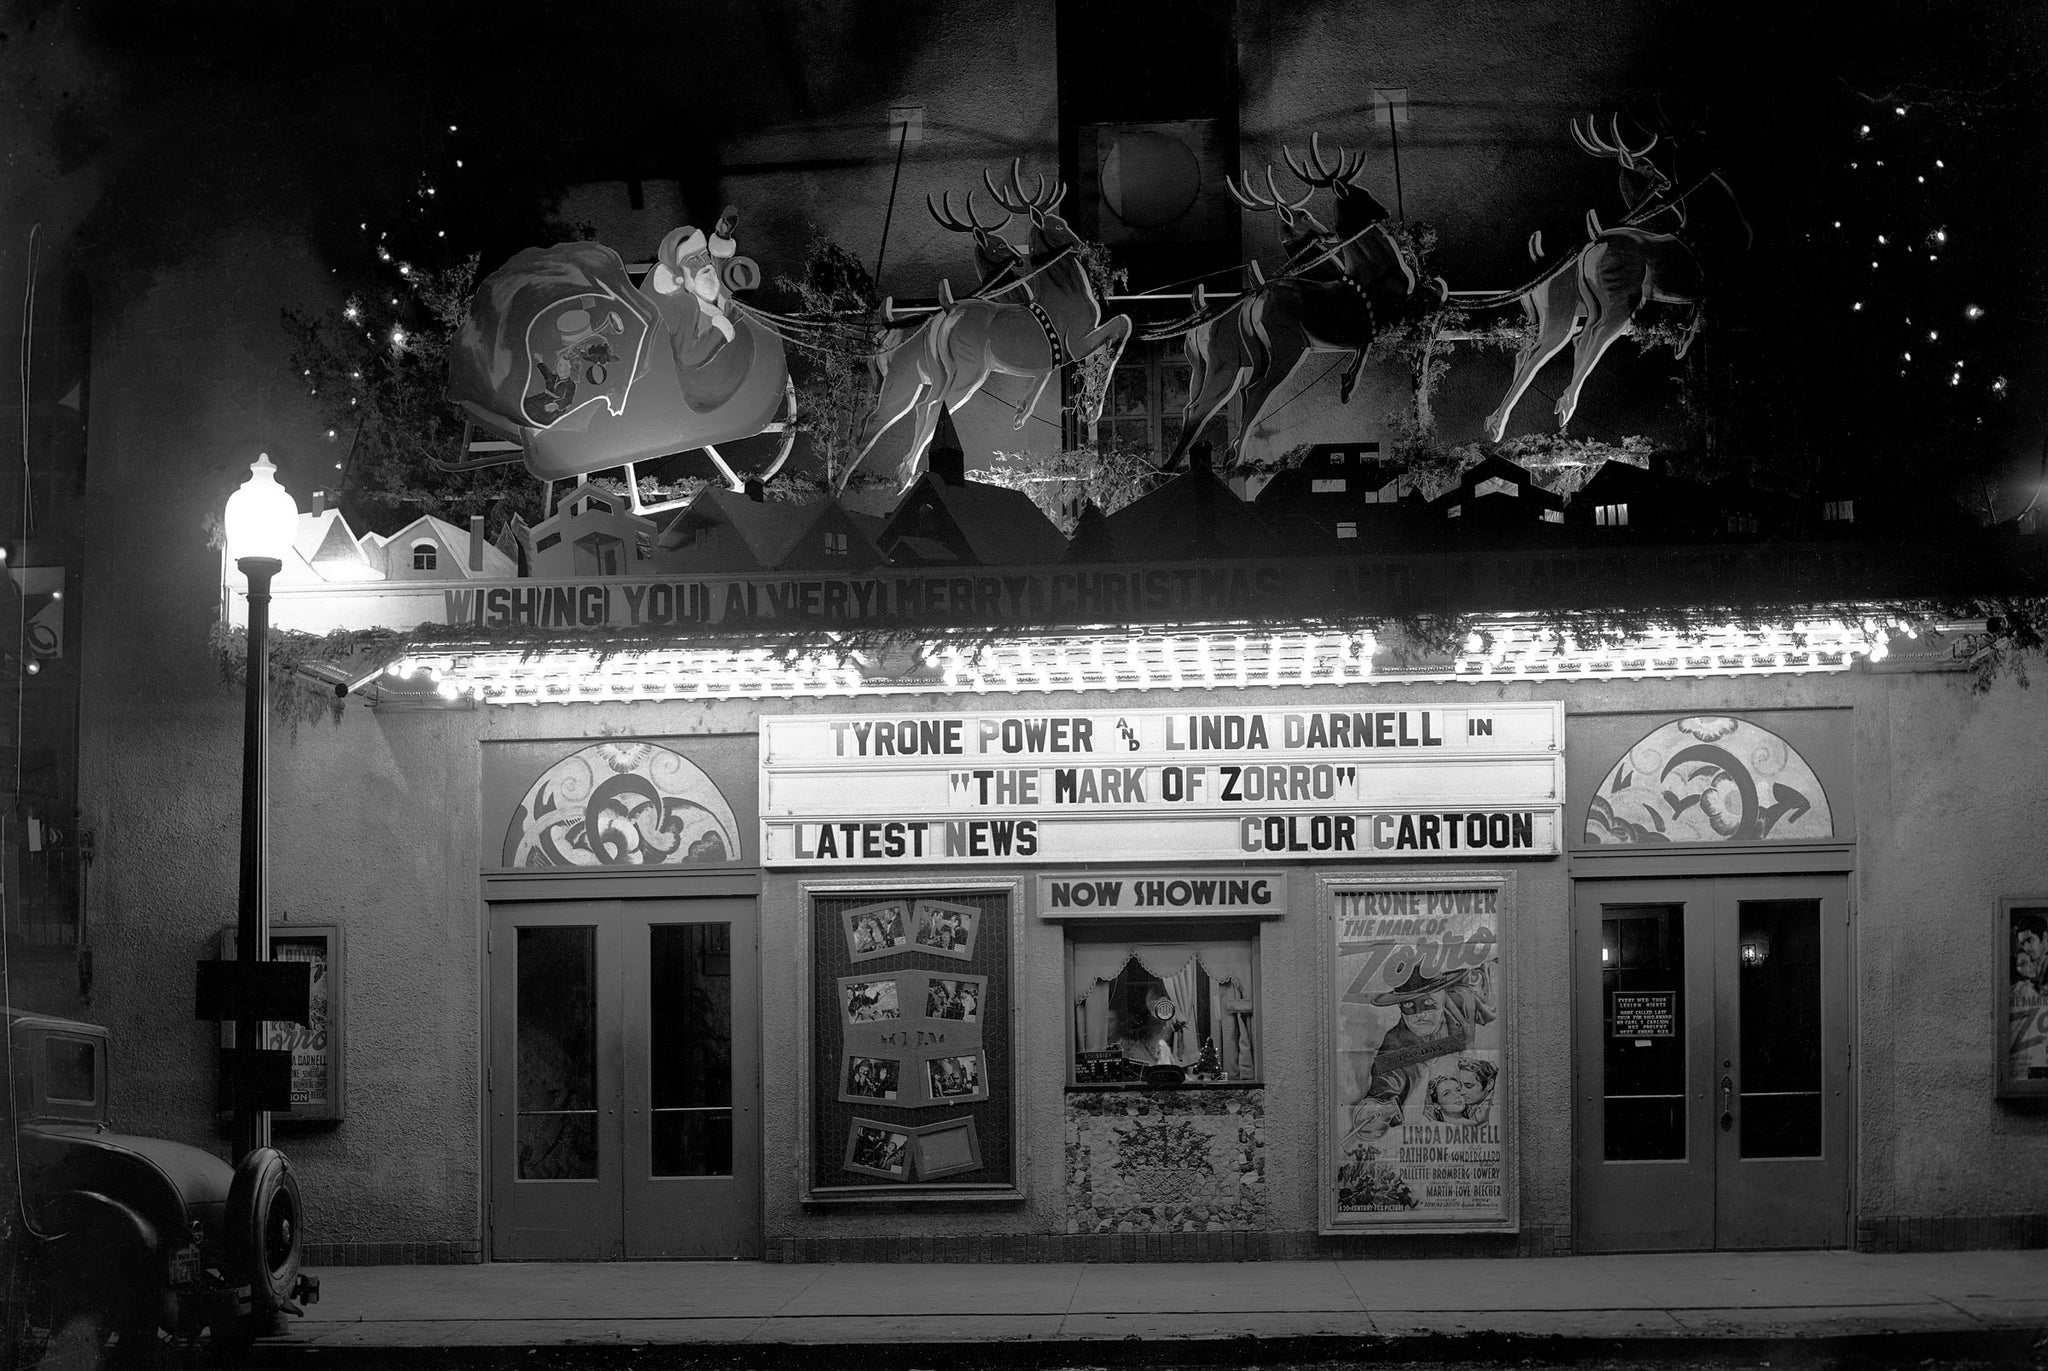 The Hot Springs Theater decorated for the holiday season and advertising “The Mark of Zorro,” circa 1940. -- Fall River Historical Society